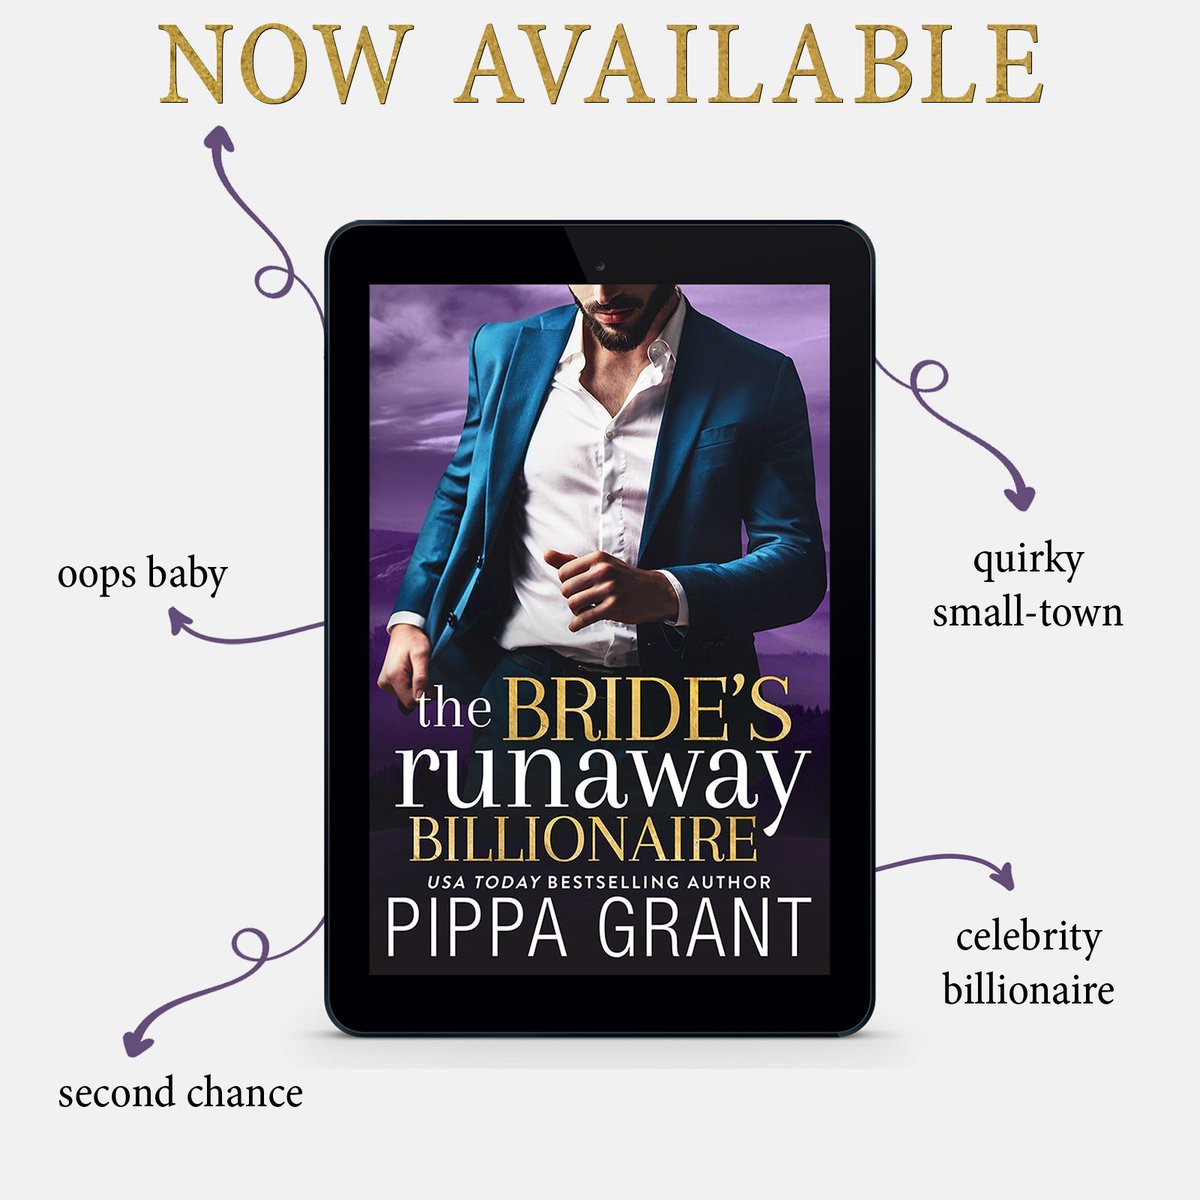 #NEW #KU “Pippa Grant's amazing storytelling and unforgettable characters left me in awe.” The Bride's Runaway Billionaire by @ReadPippa #ThreeBFFSandaWedding buff.ly/3u0kVLr (affiliate)